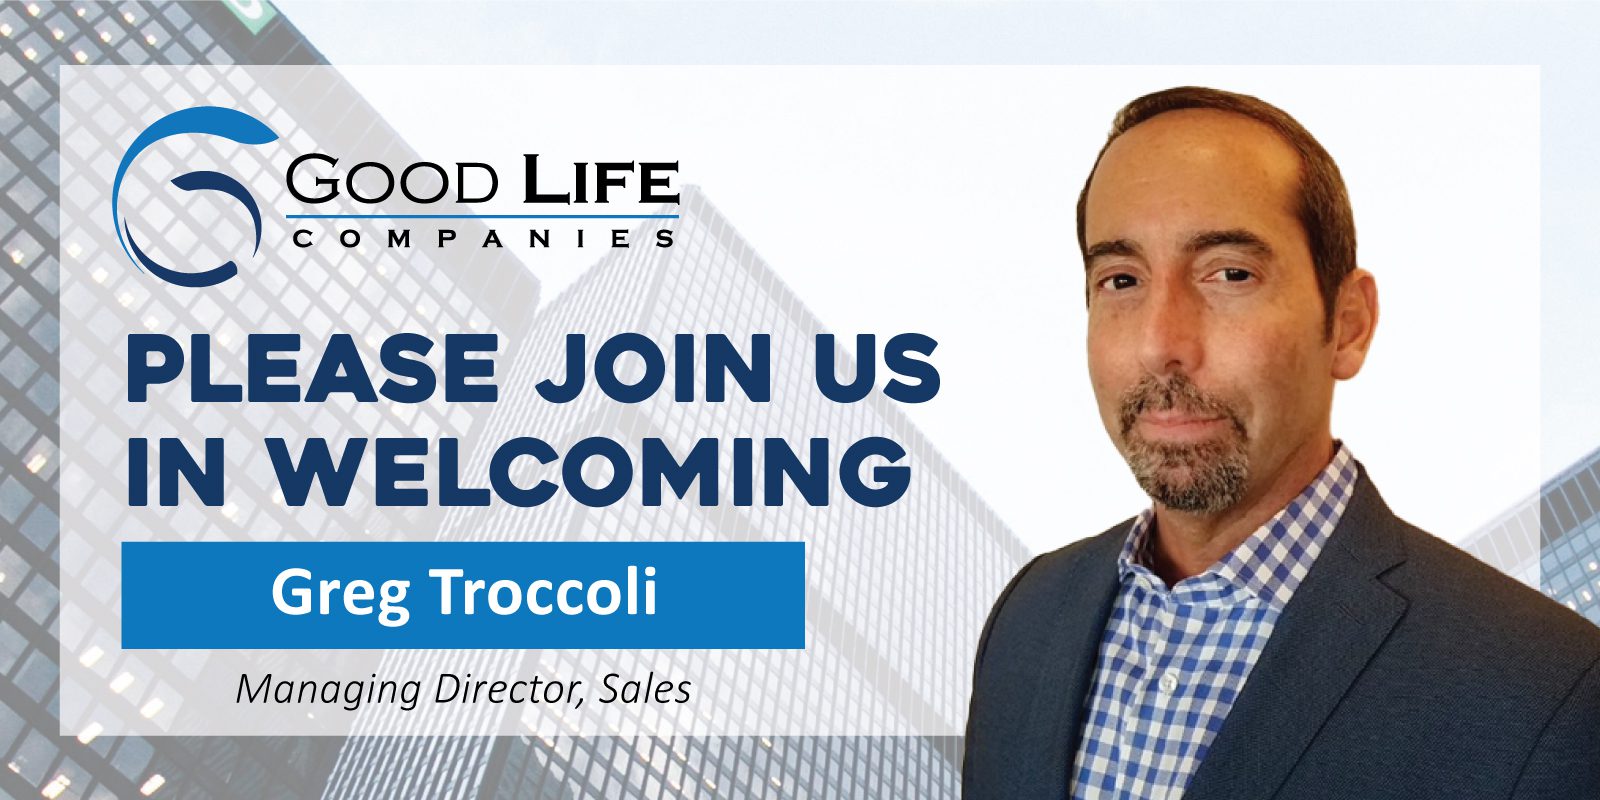 Industry Veteran Greg Troccoli Joins Good Life to Lead Company and Advisor Growth